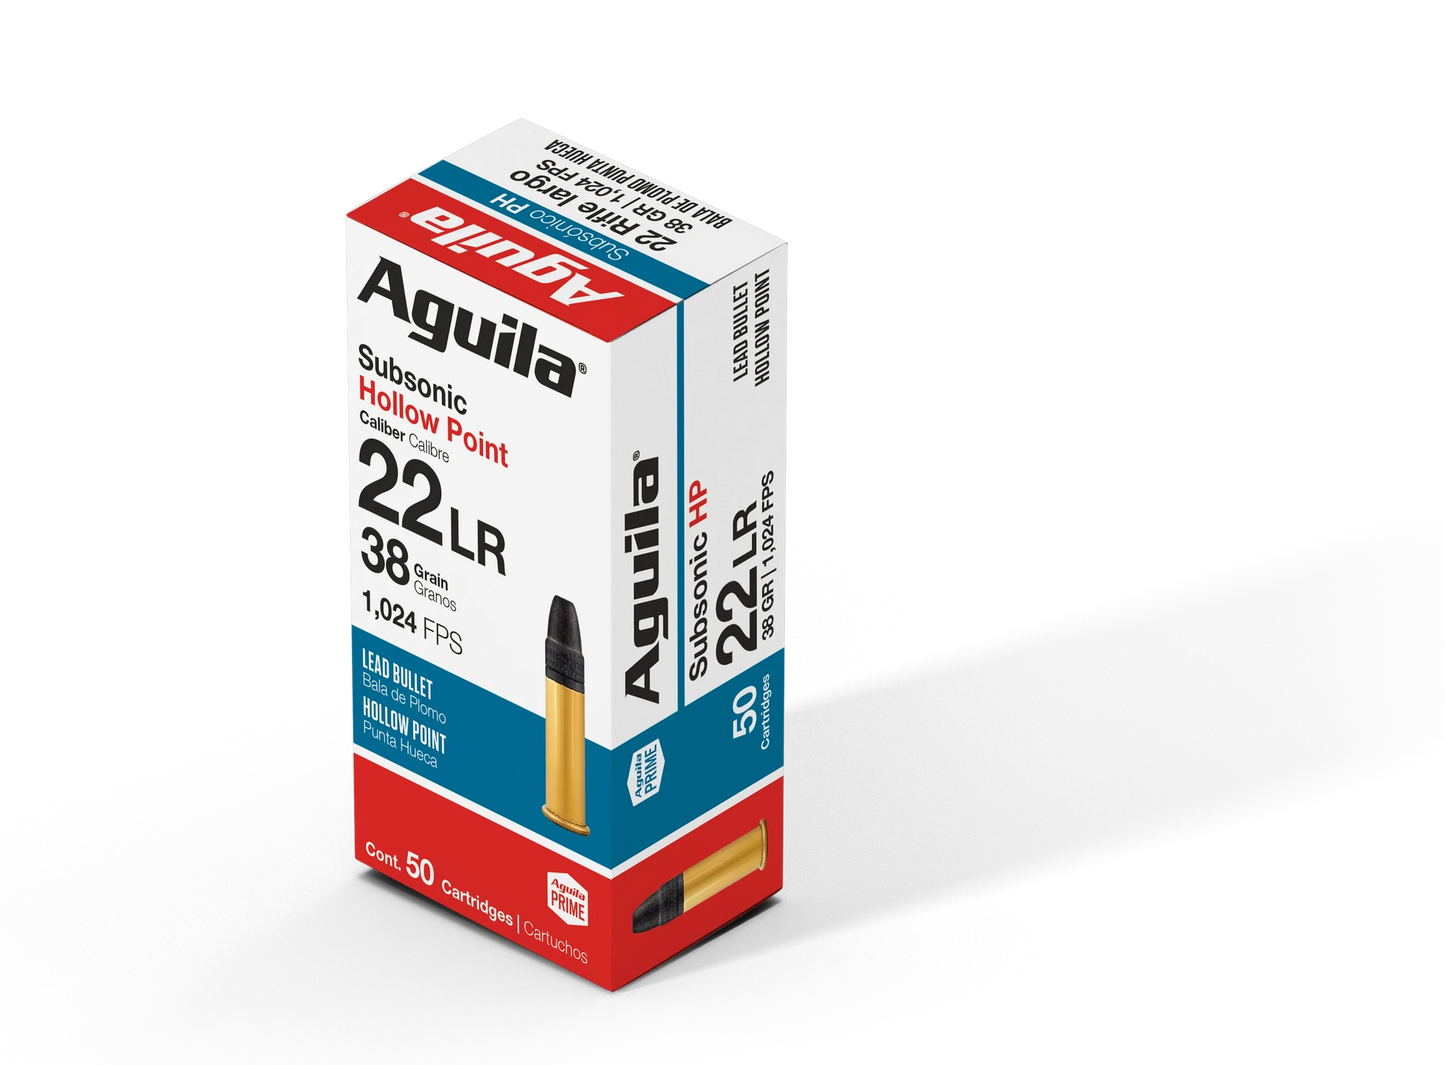 Aguila Subsonic 38gr HP 1024fps